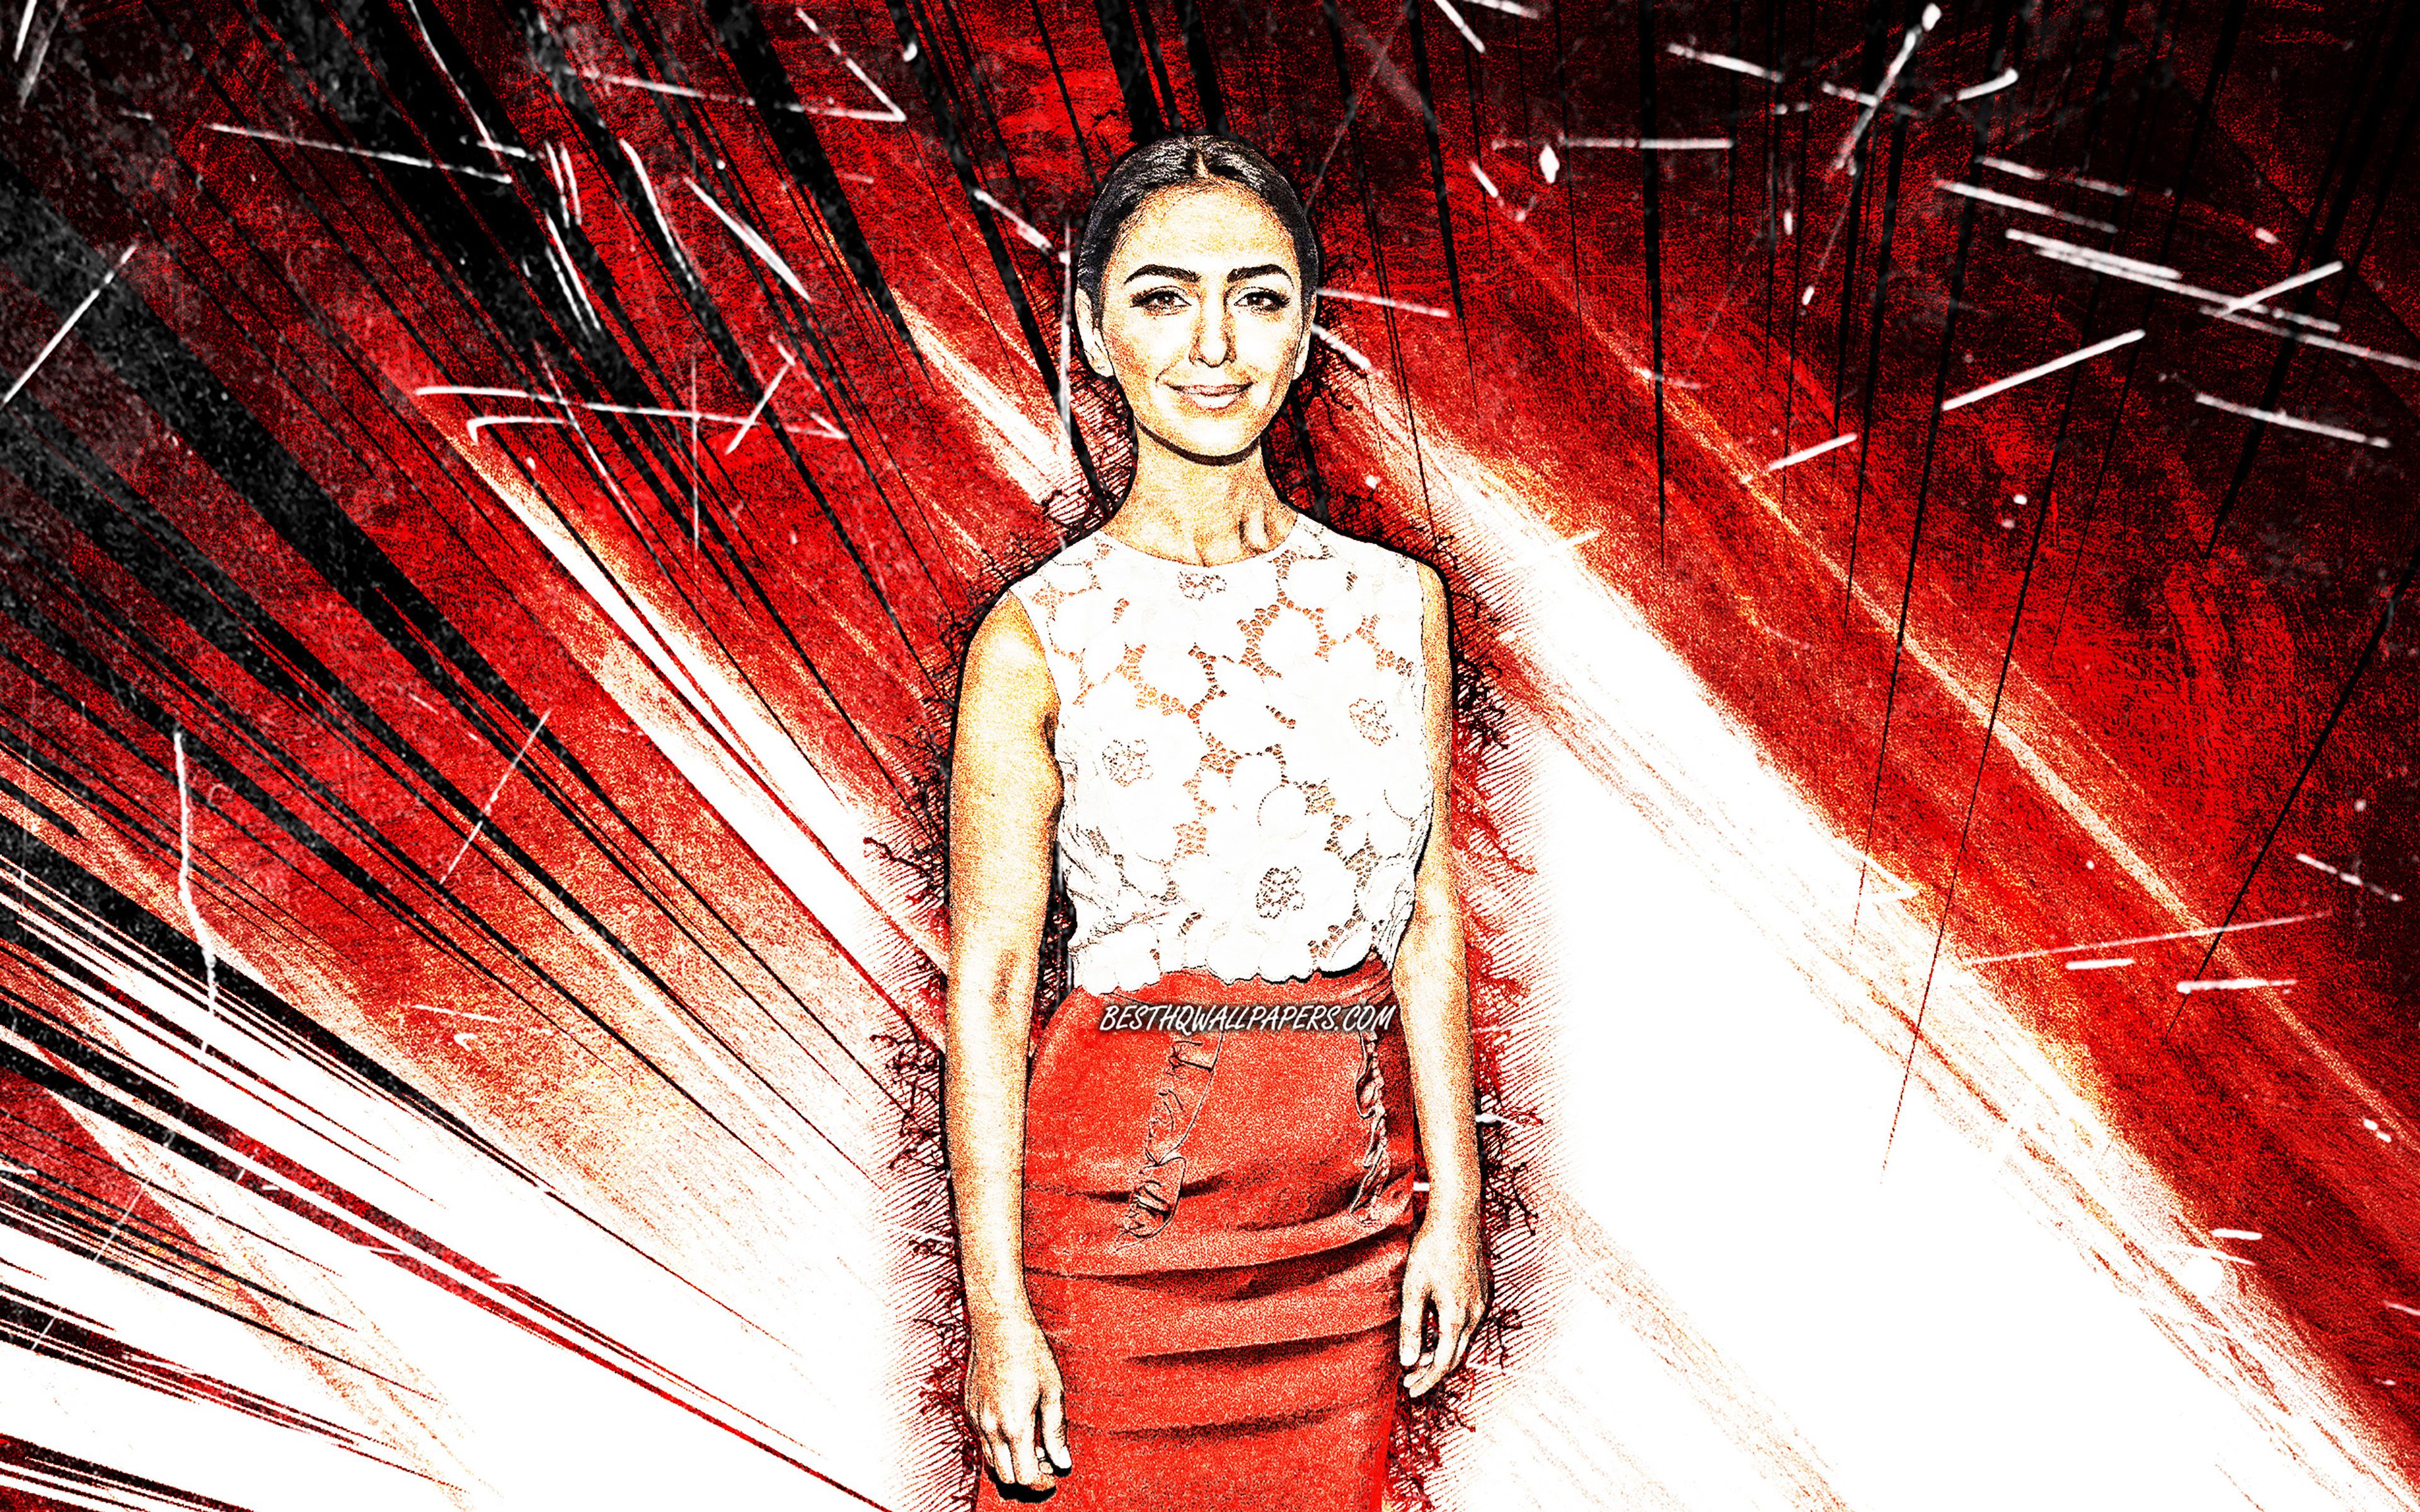 Download wallpaper 4k, Nazanin Boniadi, grunge art, Hollywood, English celebrity, movie stars, red abstract rays, English actress, Nazanin Boniadi 4K for desktop with resolution 3840x2400. High Quality HD picture wallpaper